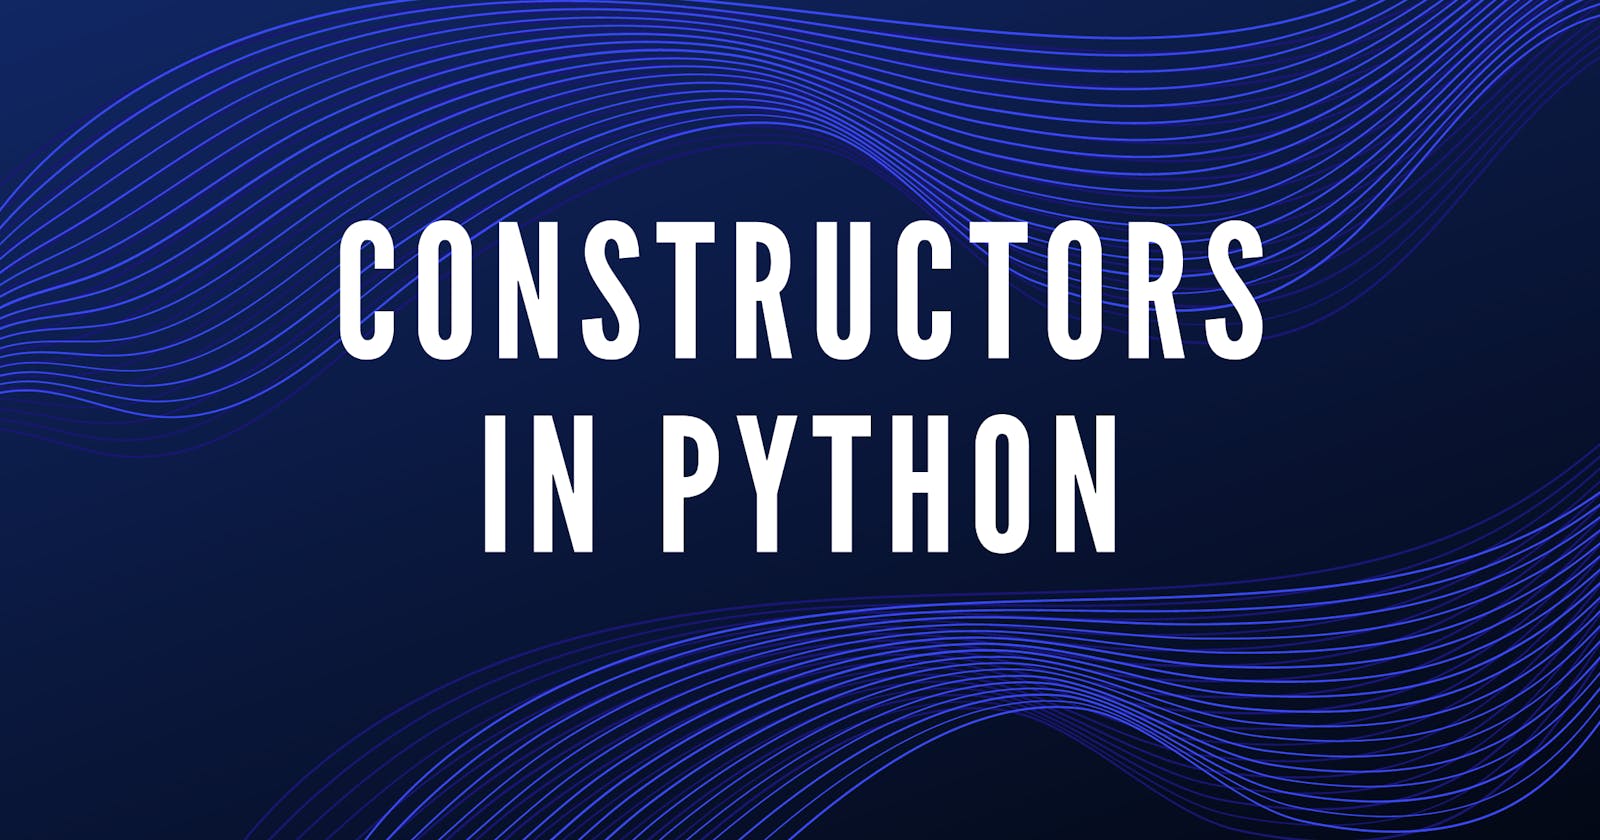 Constructors in Python - in simple words